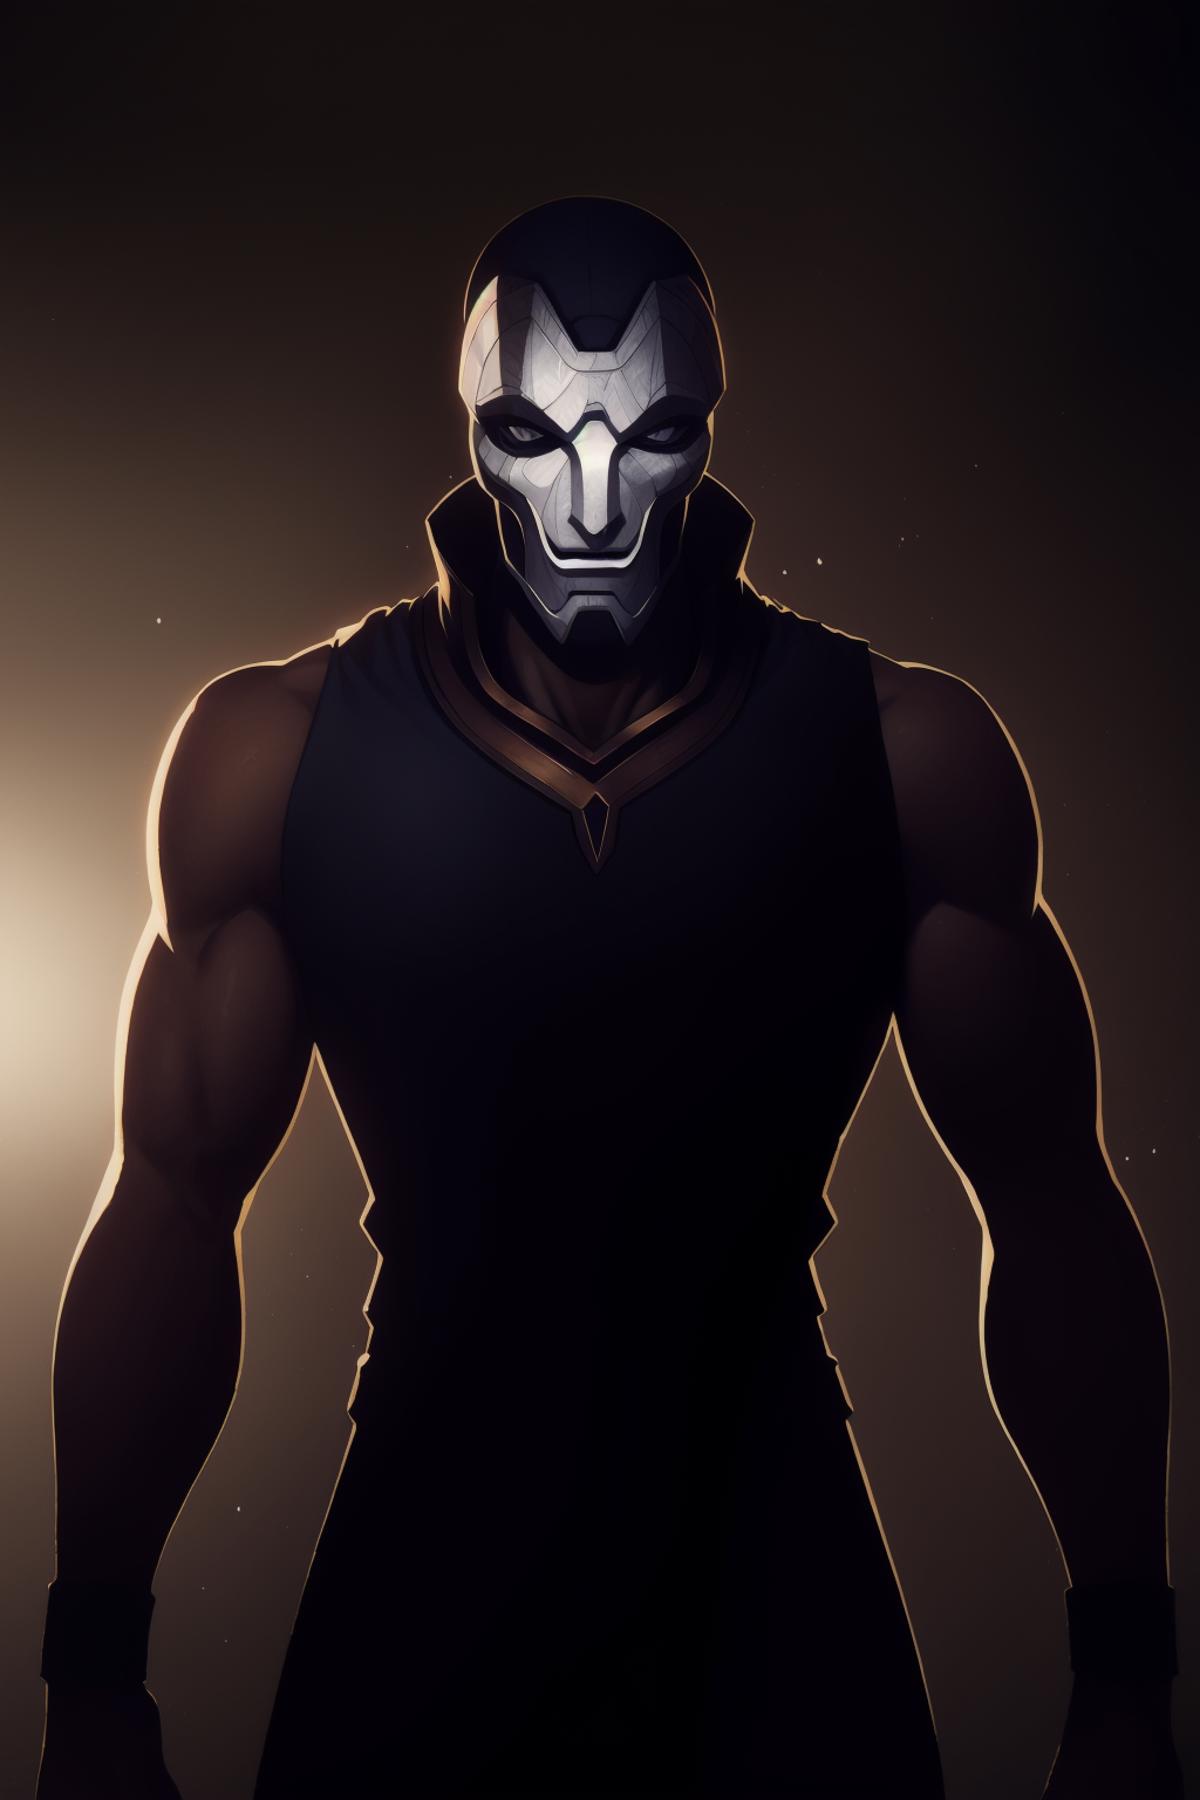 jhin-league of legends image by Magof